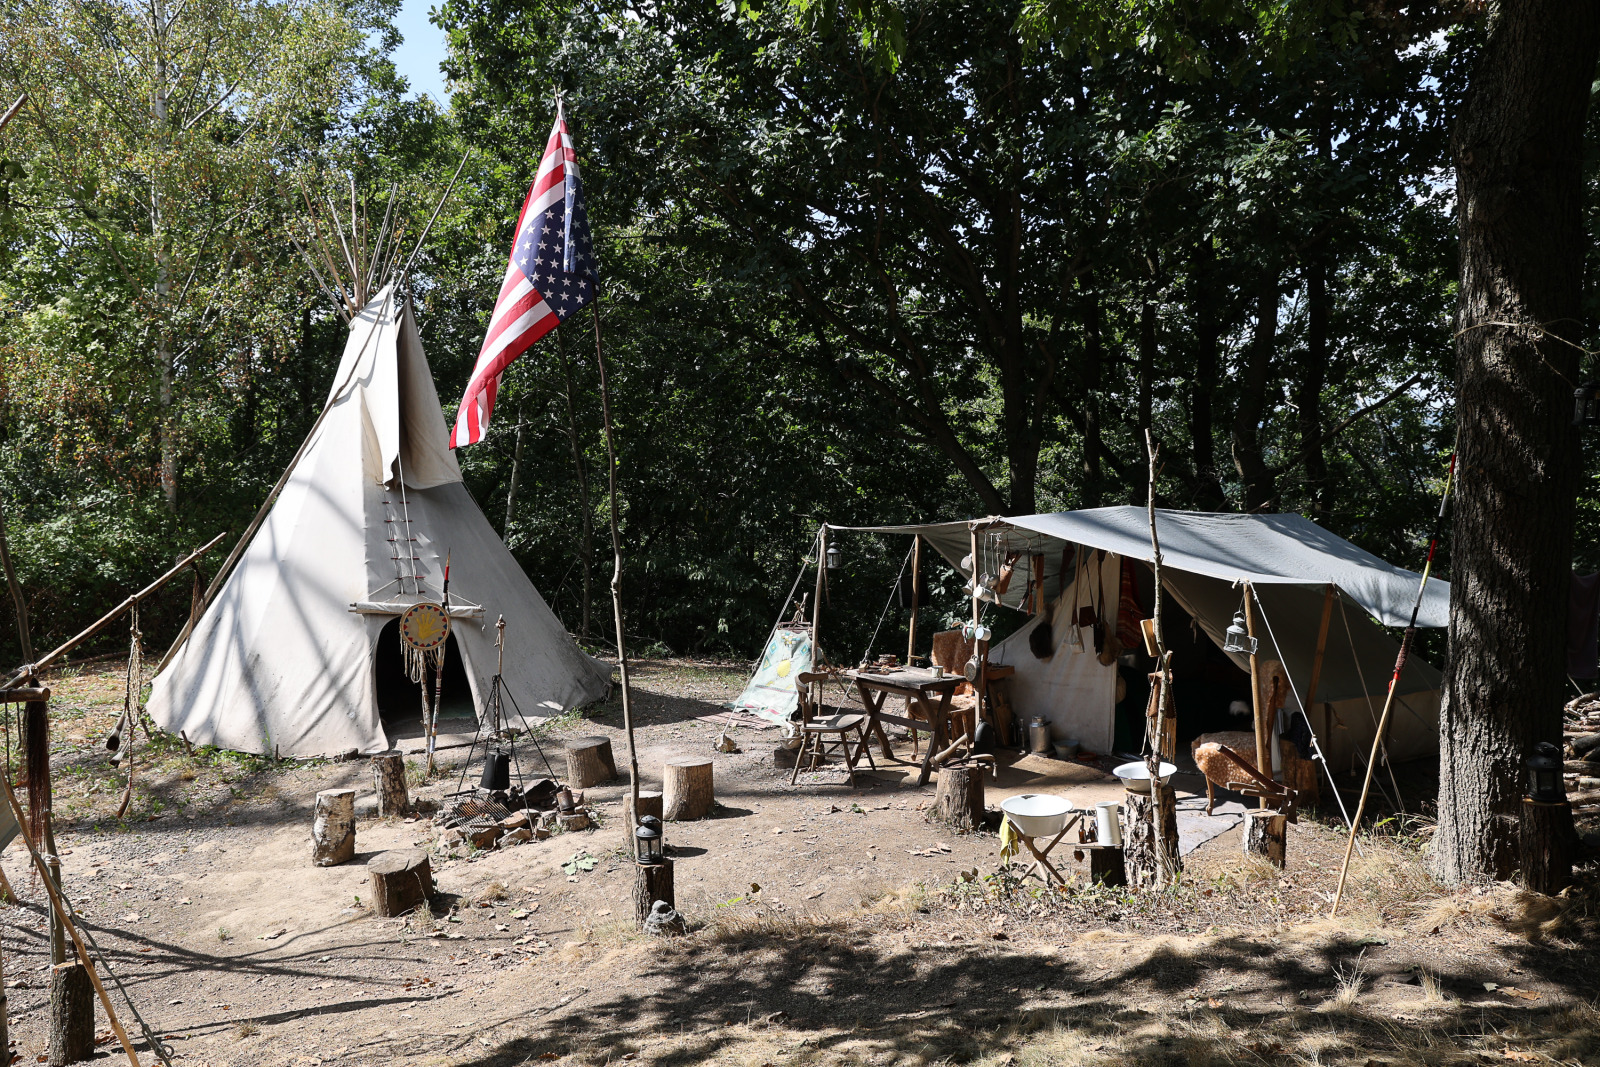 Indian camp and teepee - The American West in Belgium - Chaudfontaine